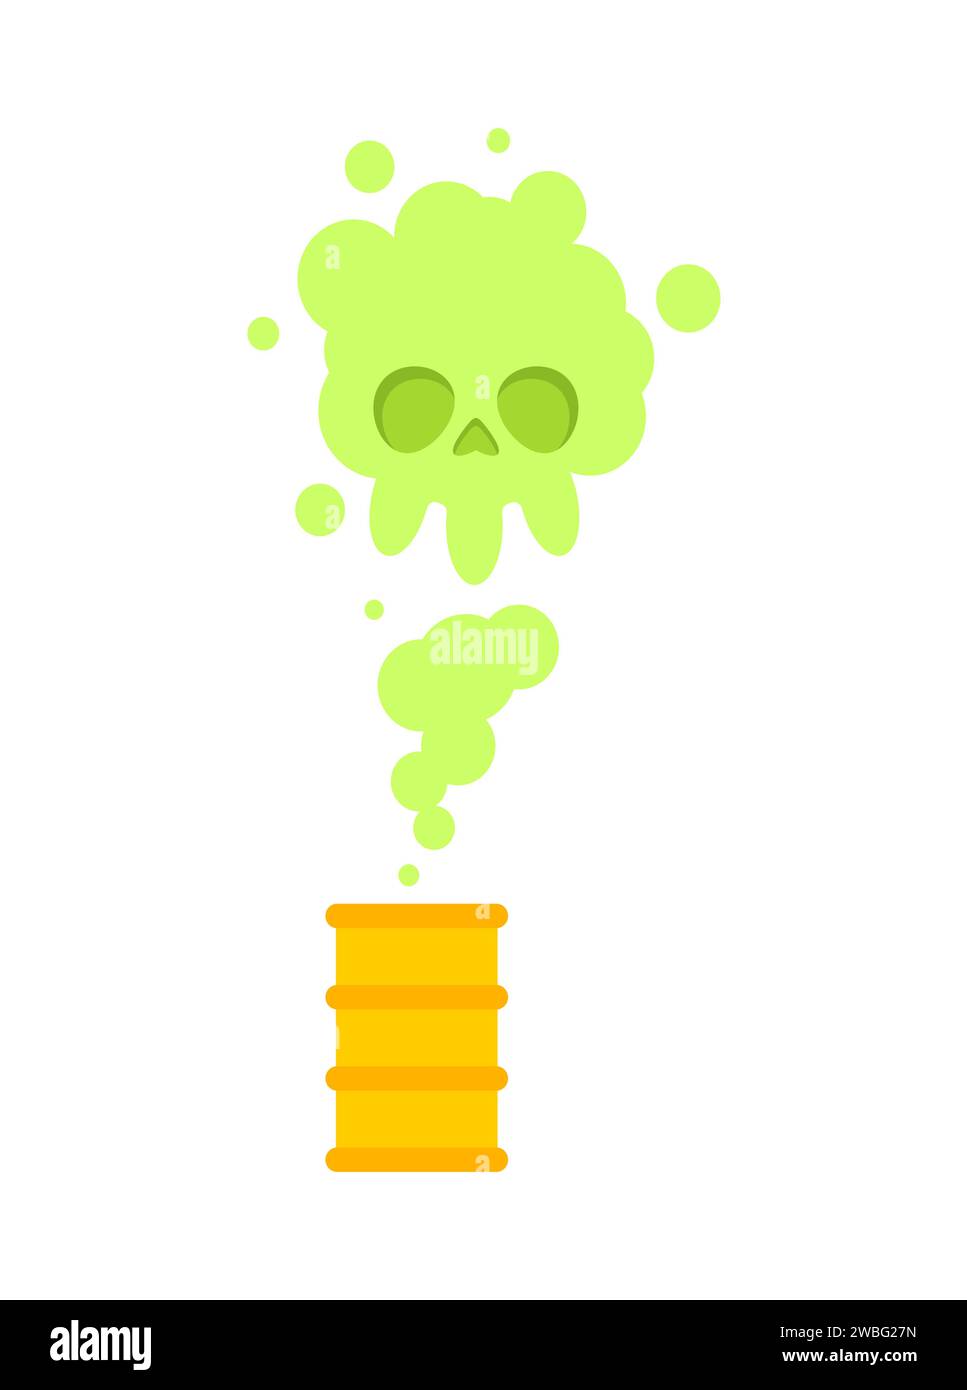 Deadly gas from barrel. Smoke skull is sign of death. Stock Vector